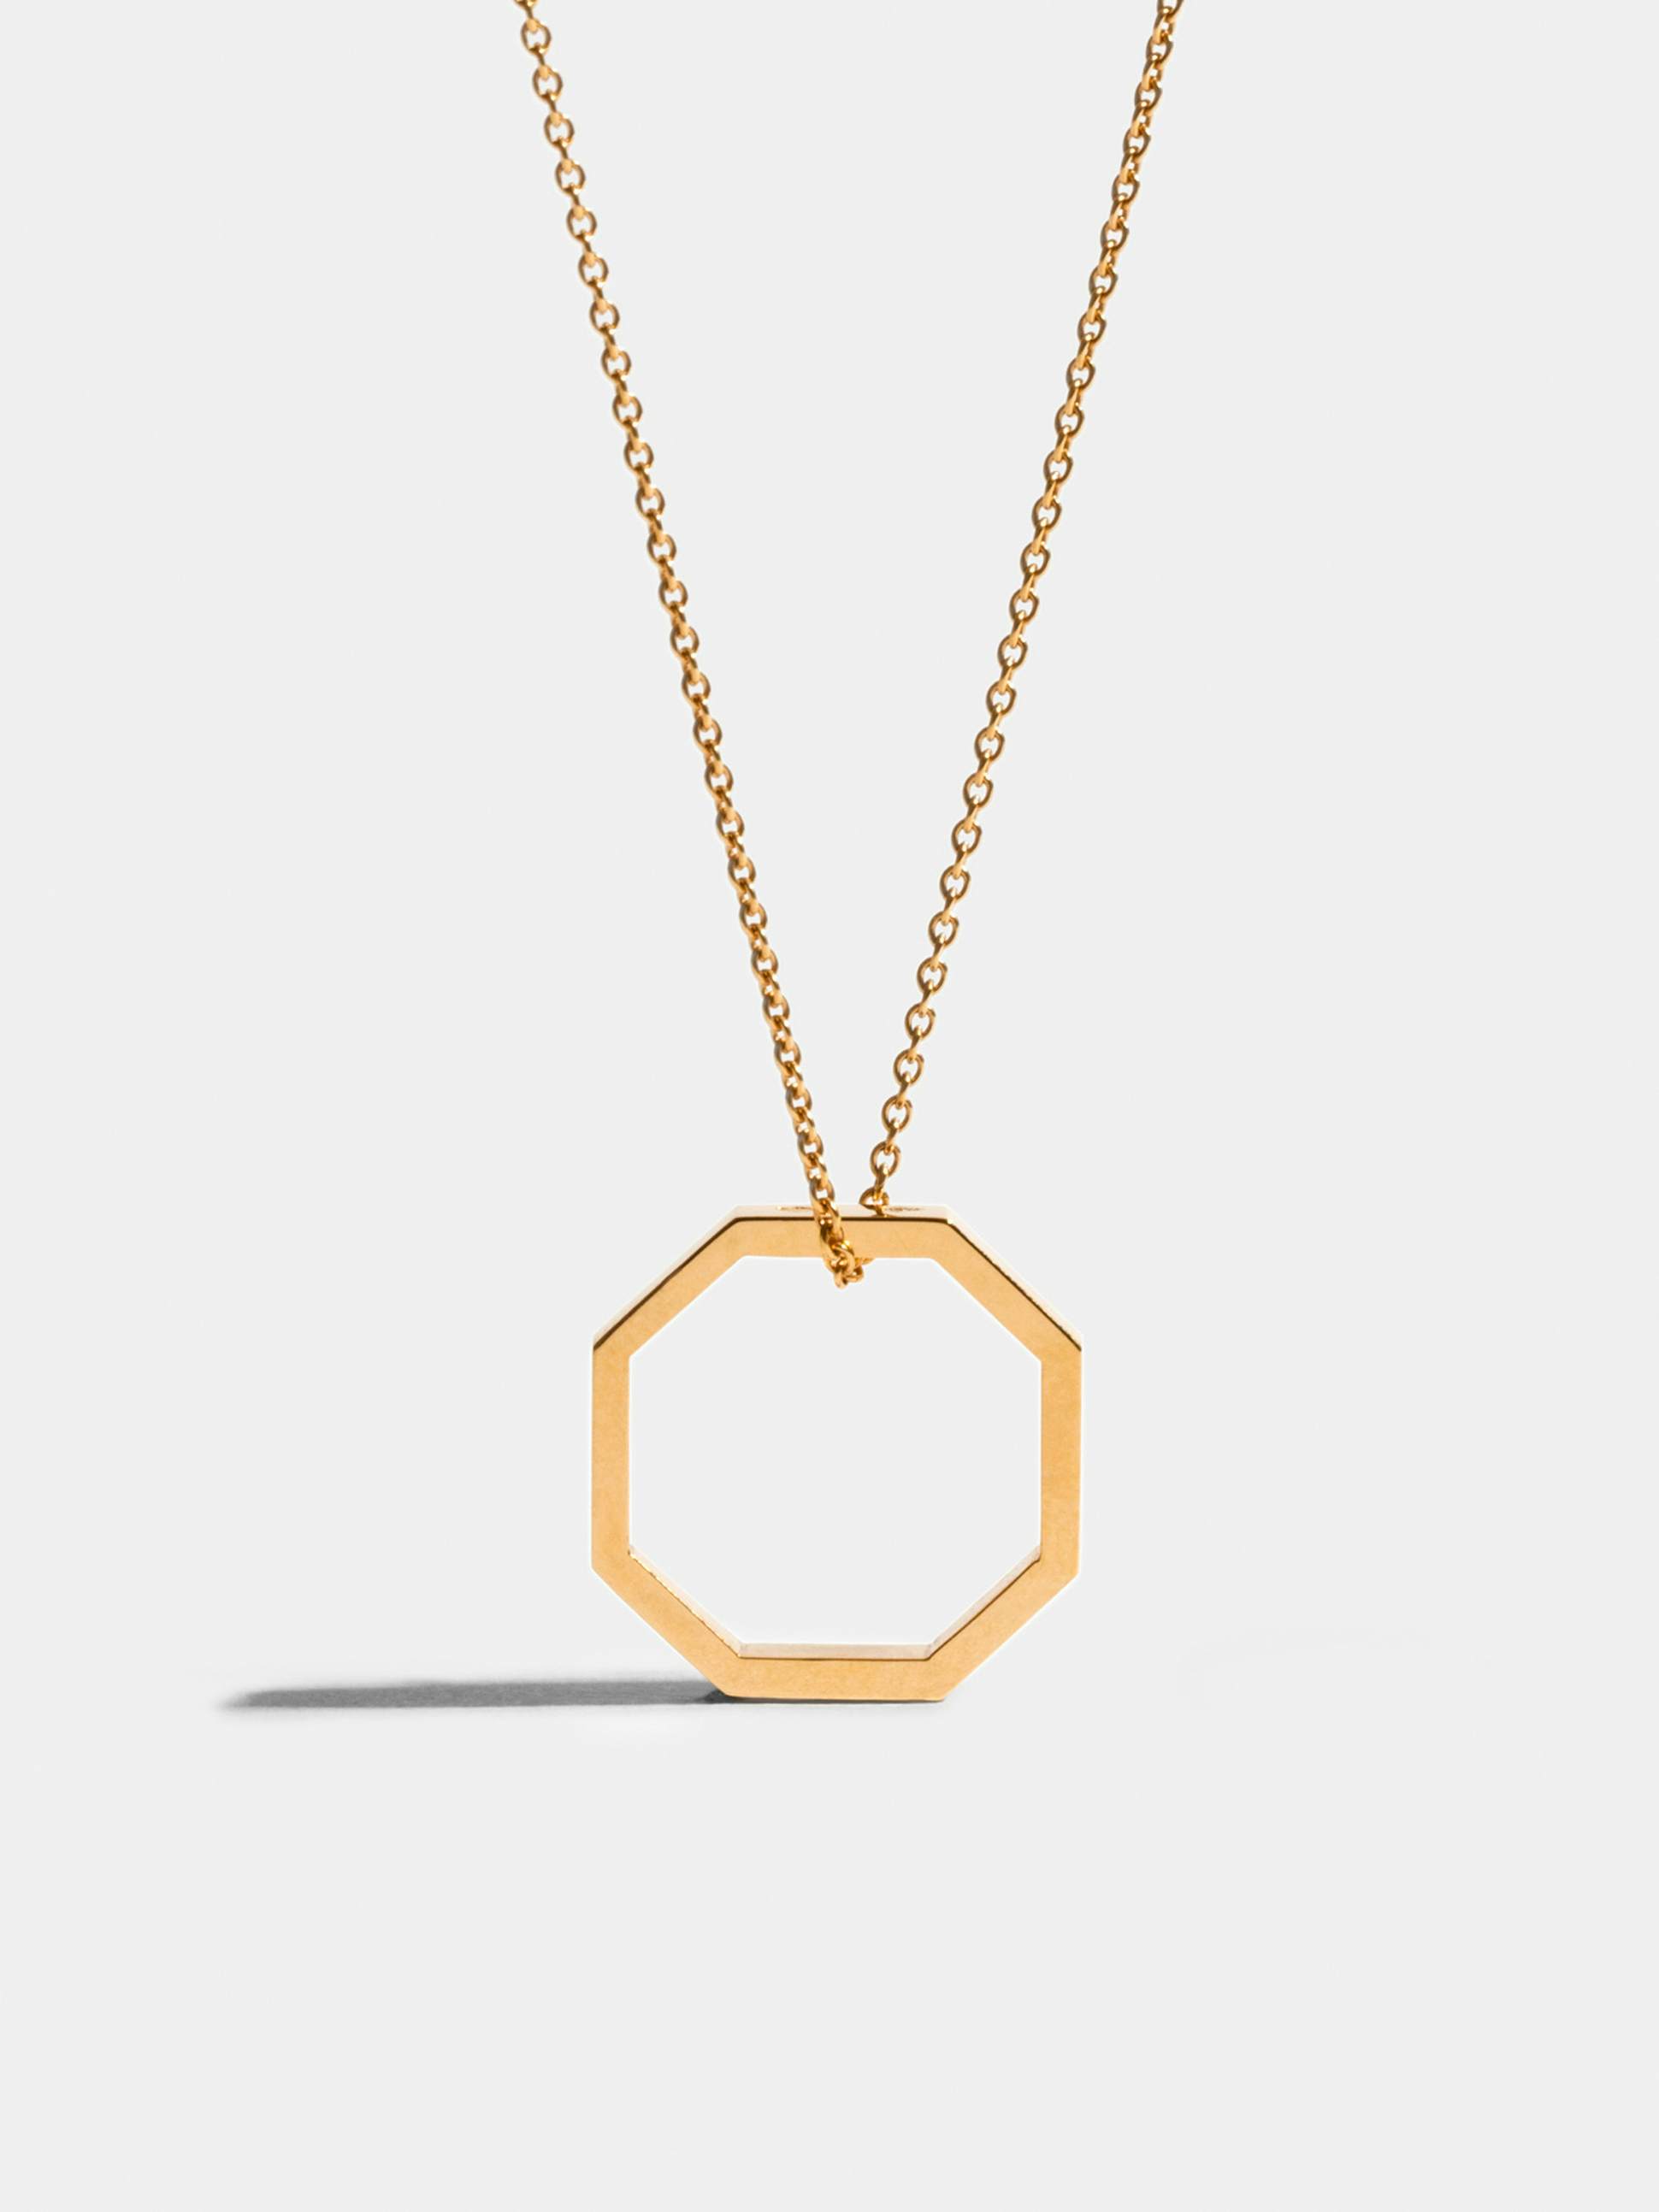 Octogone necklace with a 18mm pendant in 18k Fairmined ethical yellow gold, on a 88cm chain.